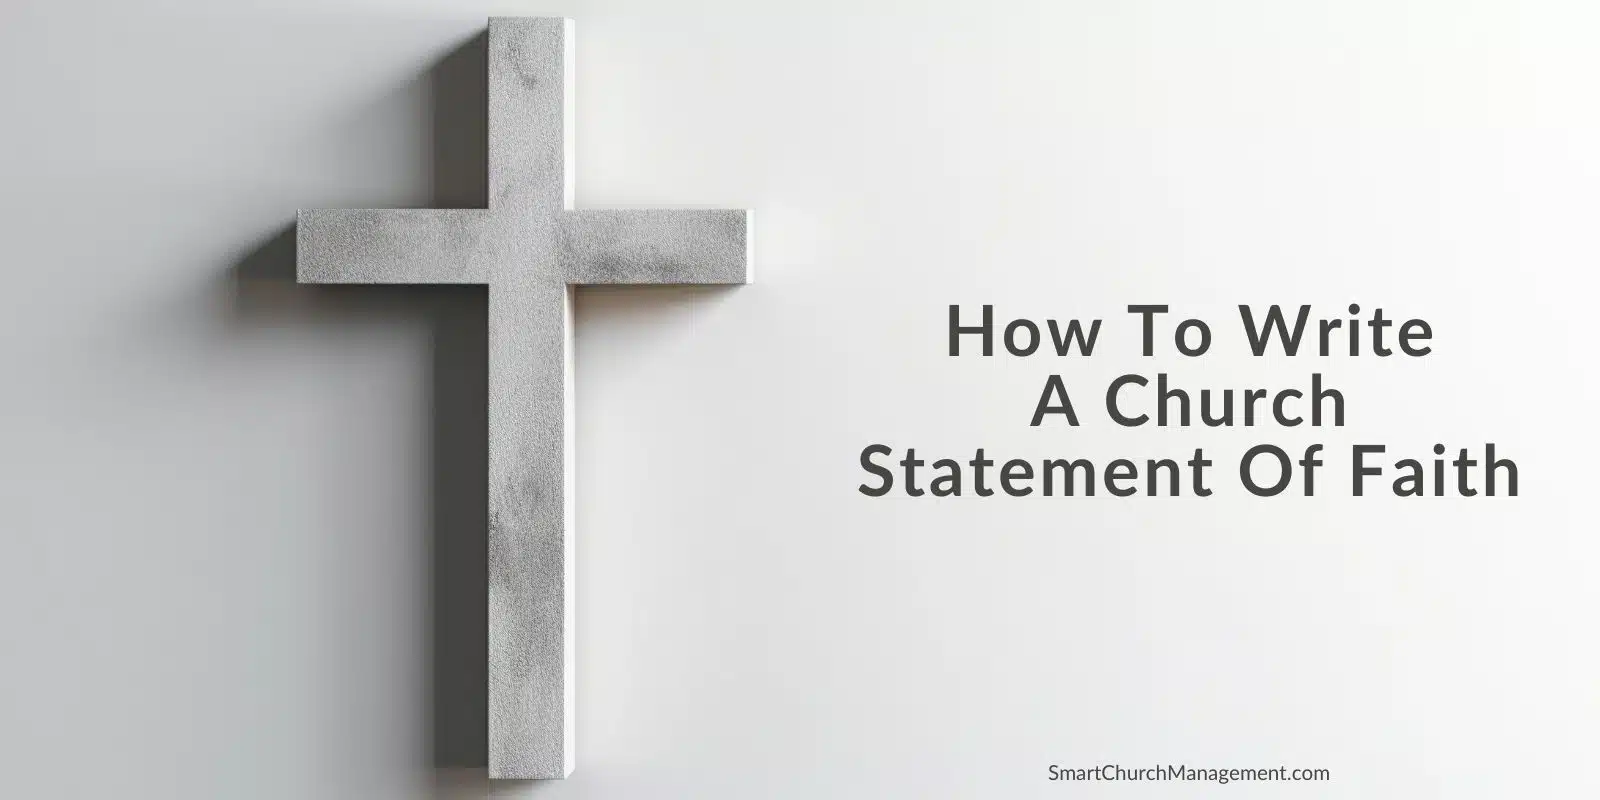 How to write a church statement of faith